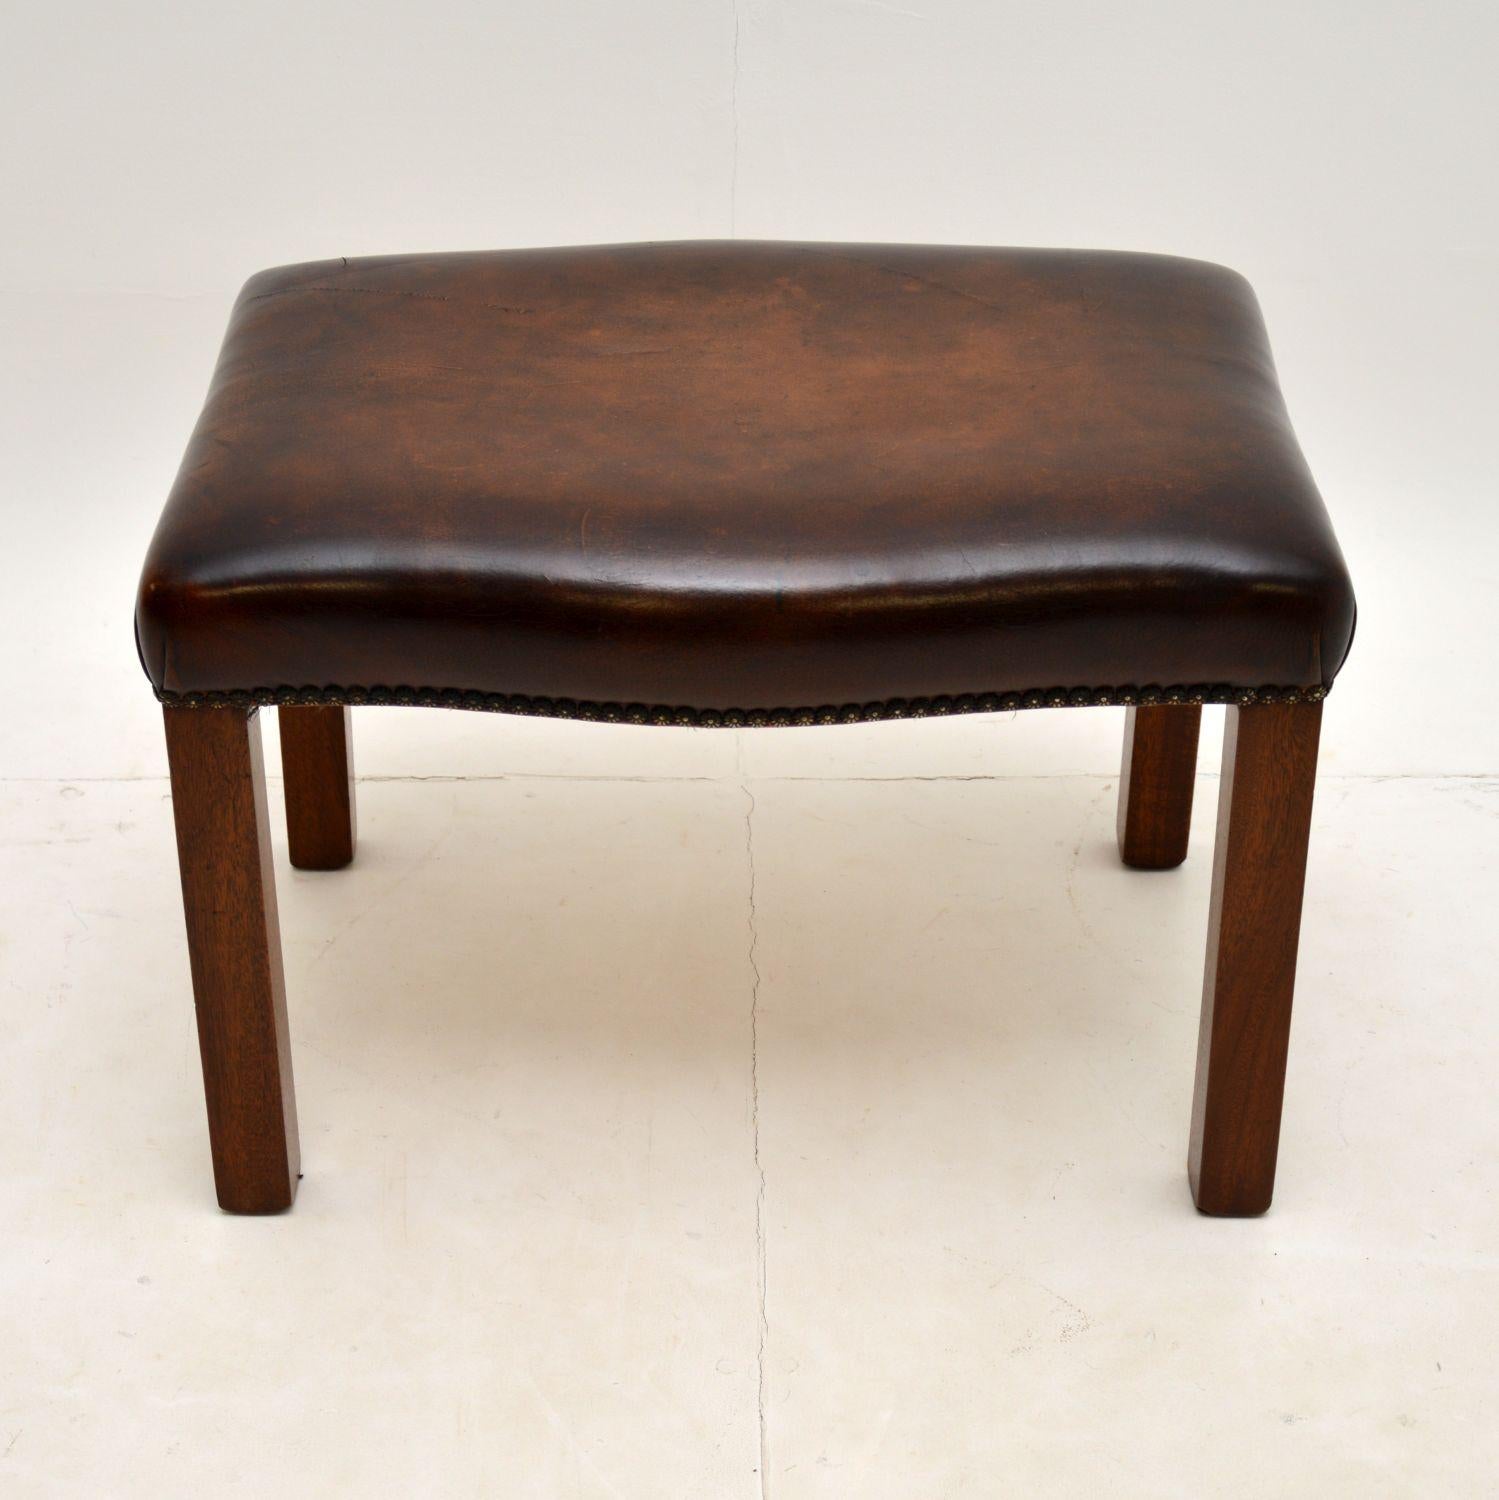 An excellent leather and mahogany stool, in the antique Georgian Chippendale style. This was made in England, it dates from around the 1930-50’s.

The shape is lovely and this is of excellent quality. The brown leather has been professionally hand